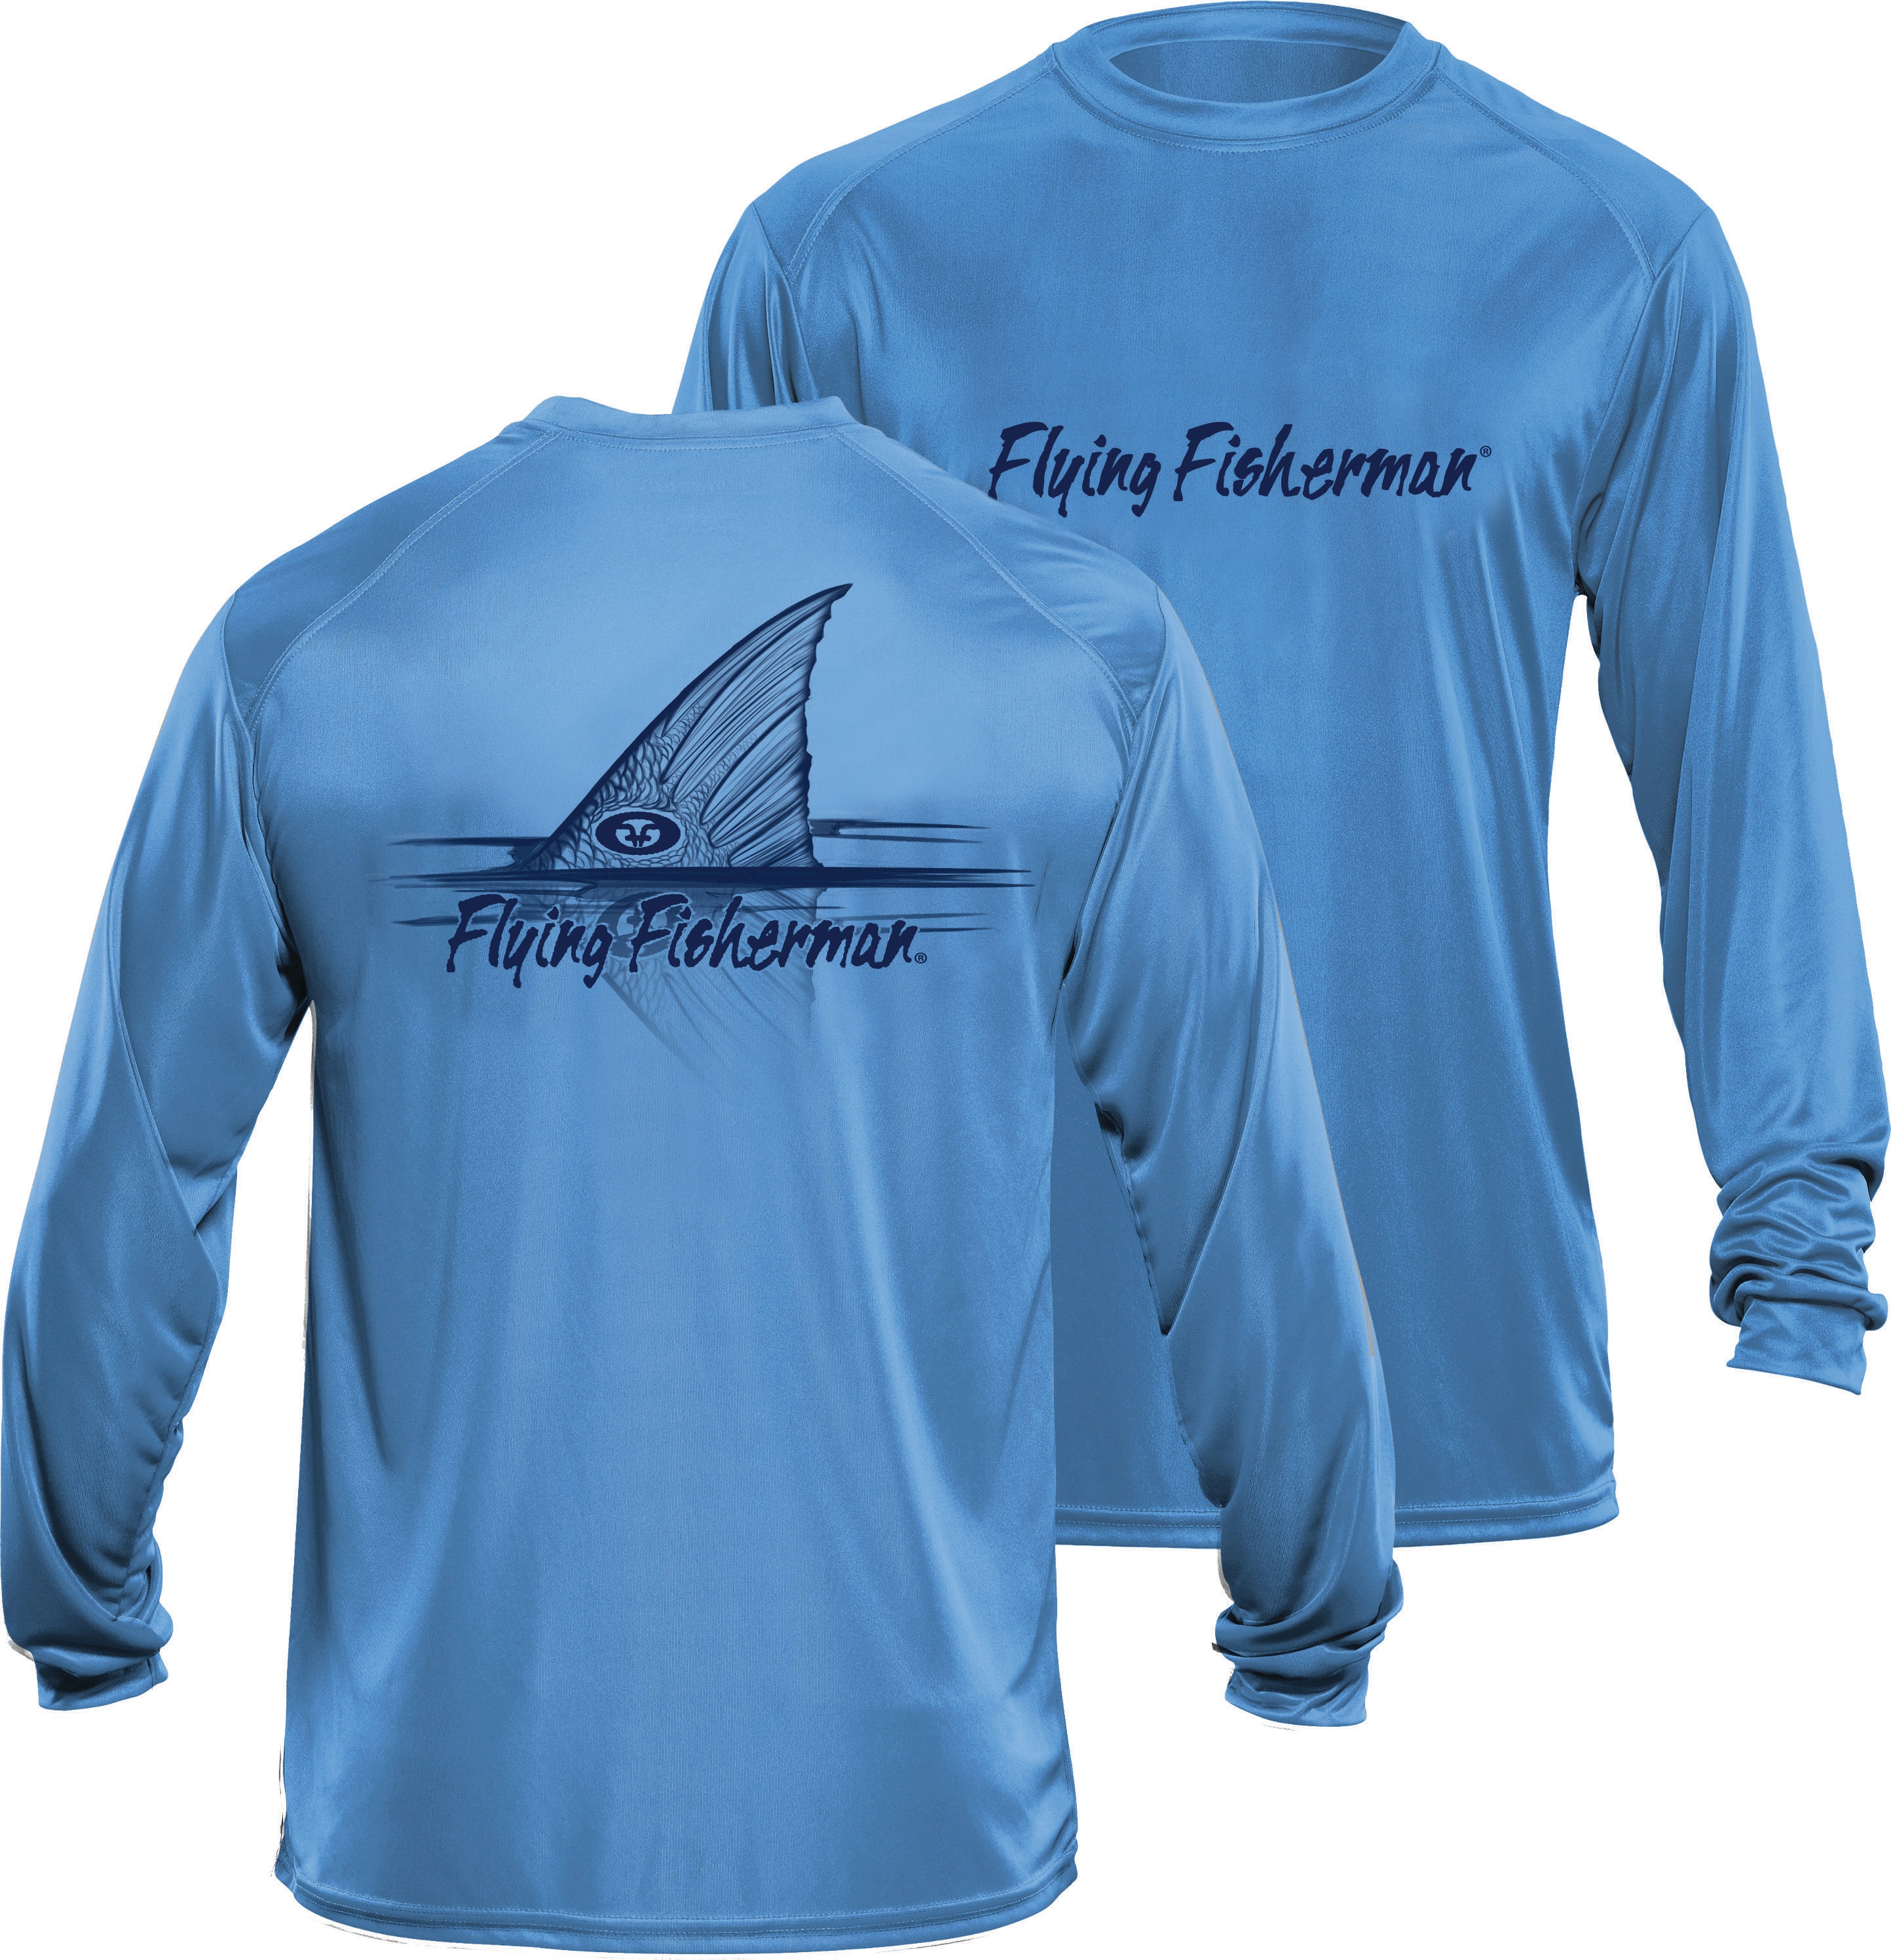 Flying Fisherman Unisex Polyester Long Sleeve Graphic T-shirt (Large) at